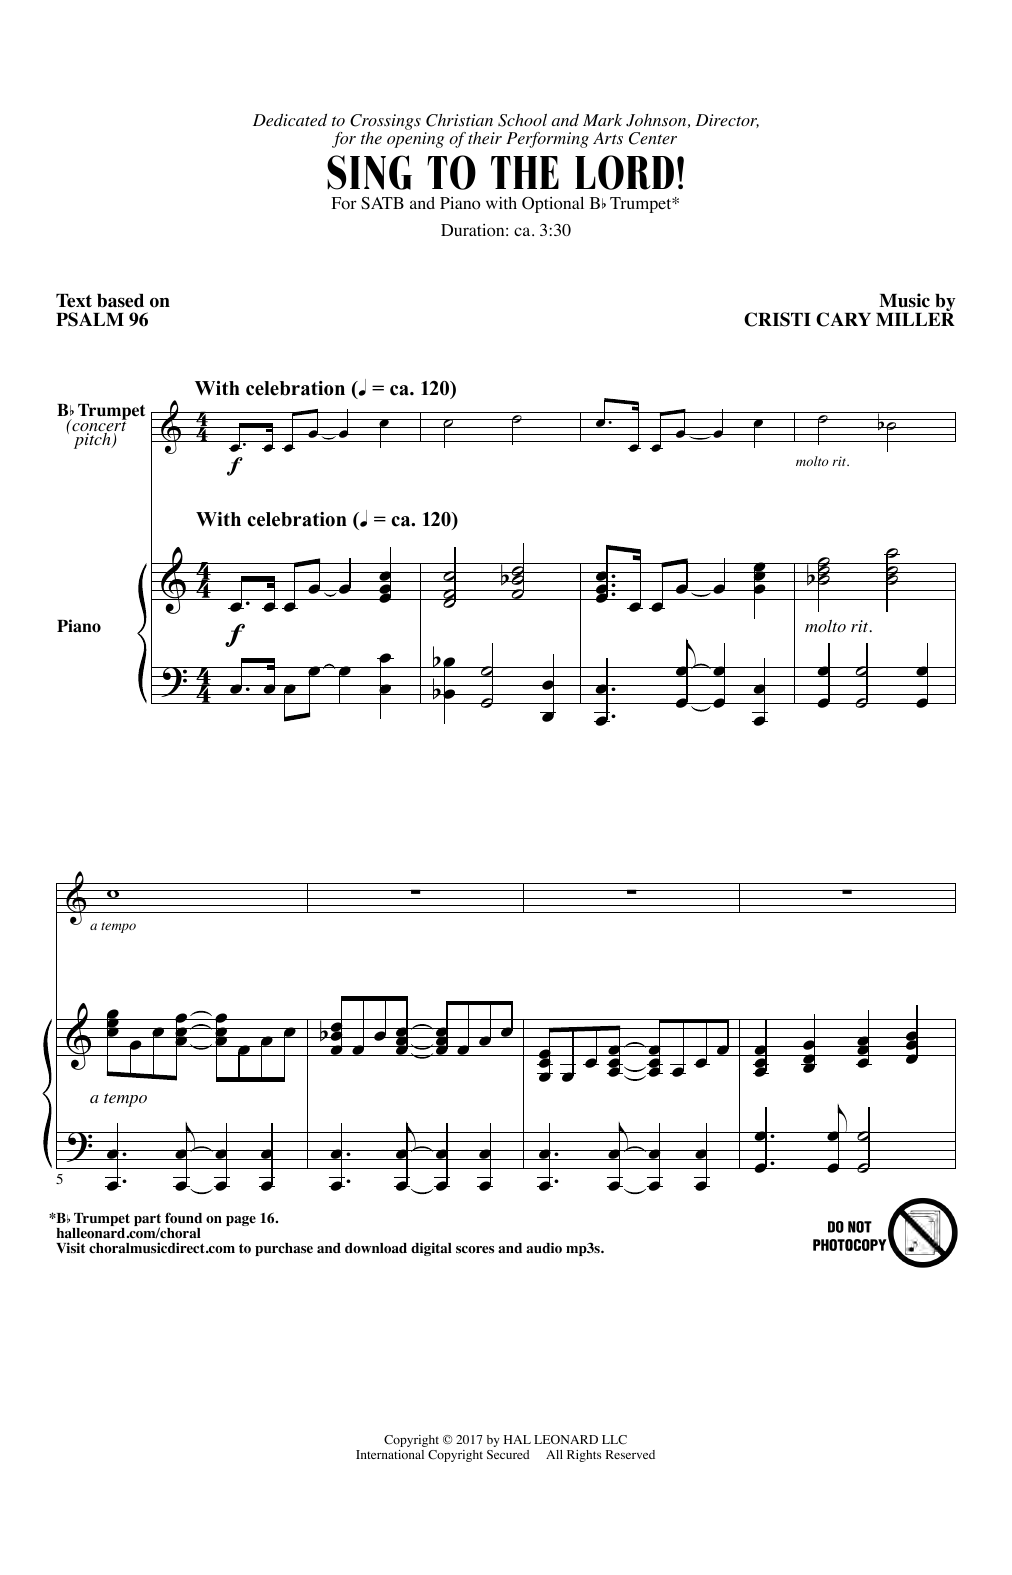 Download Cristi Cary Miller Sing To The Lord! Sheet Music